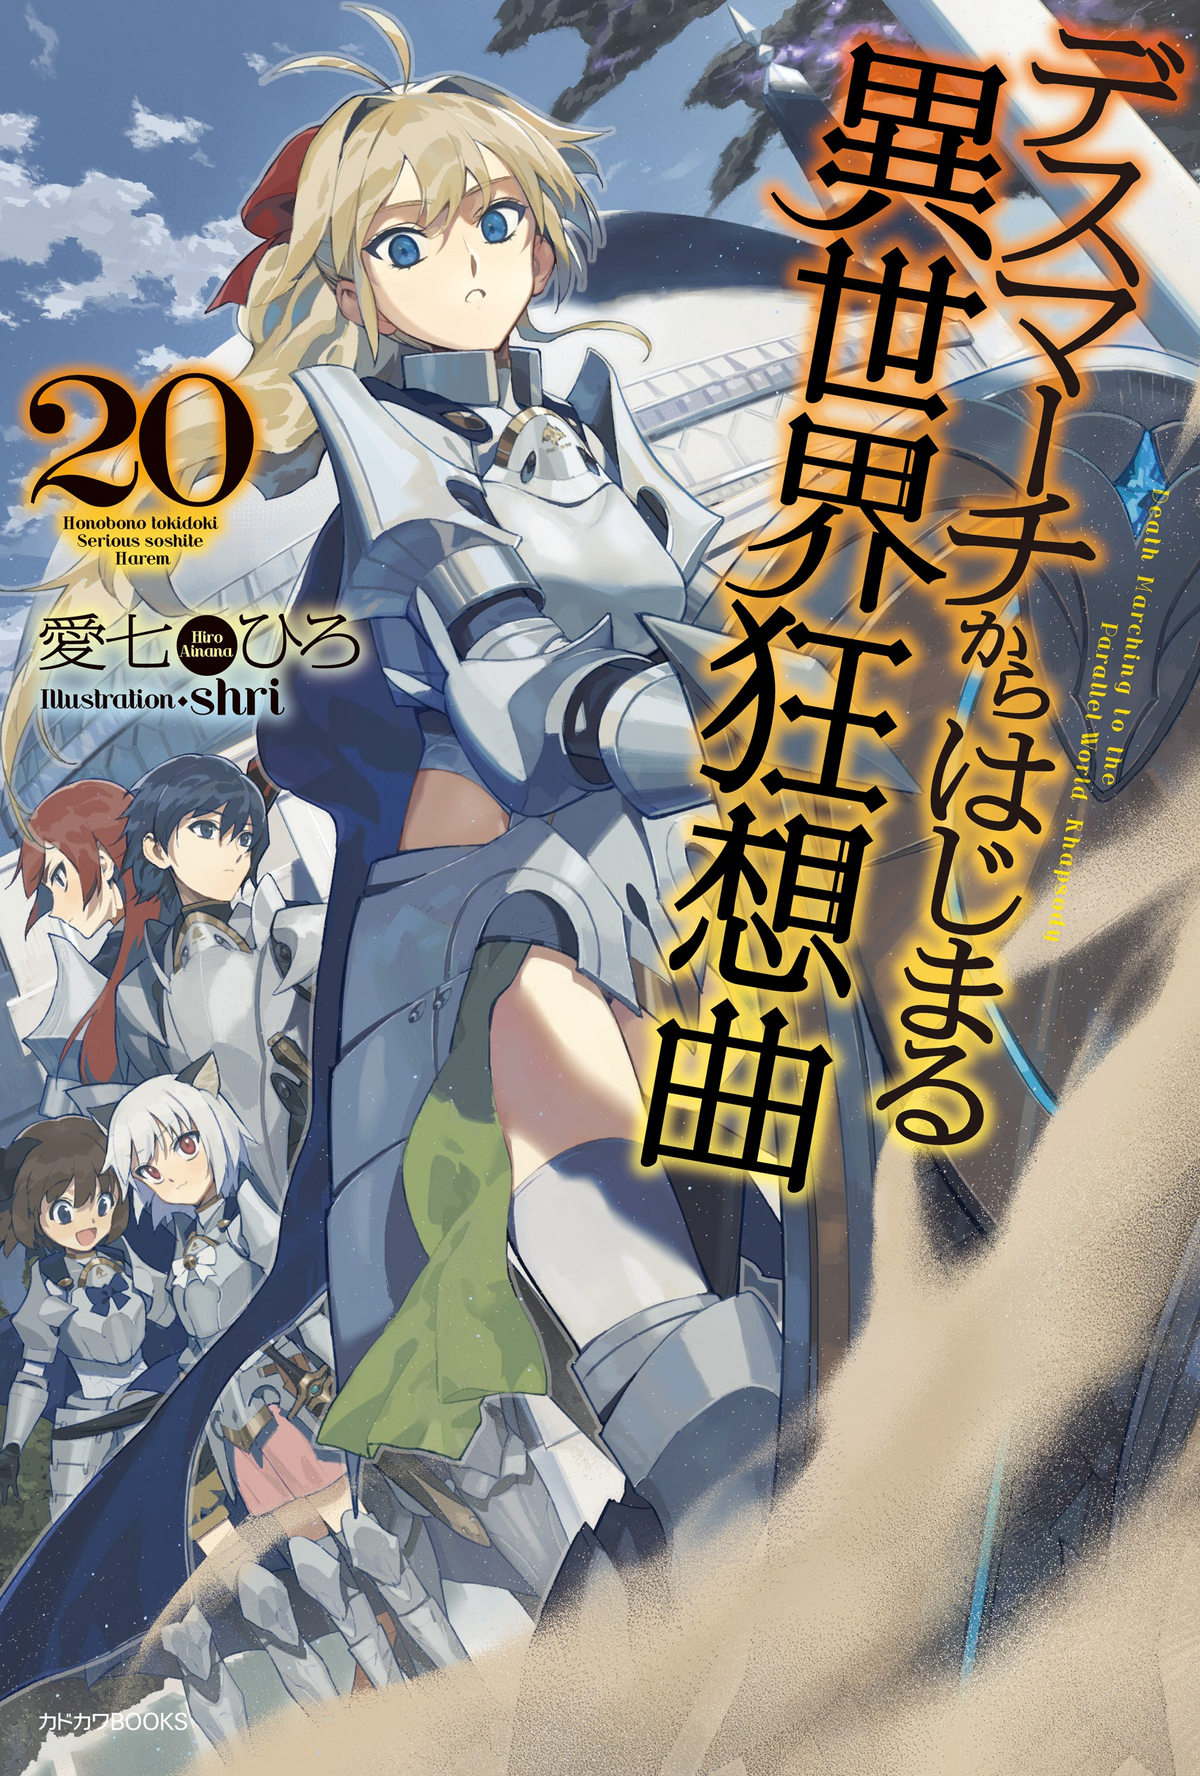 Light Novel Volume 6, Death March to the Parallel World Rhapsody Wiki